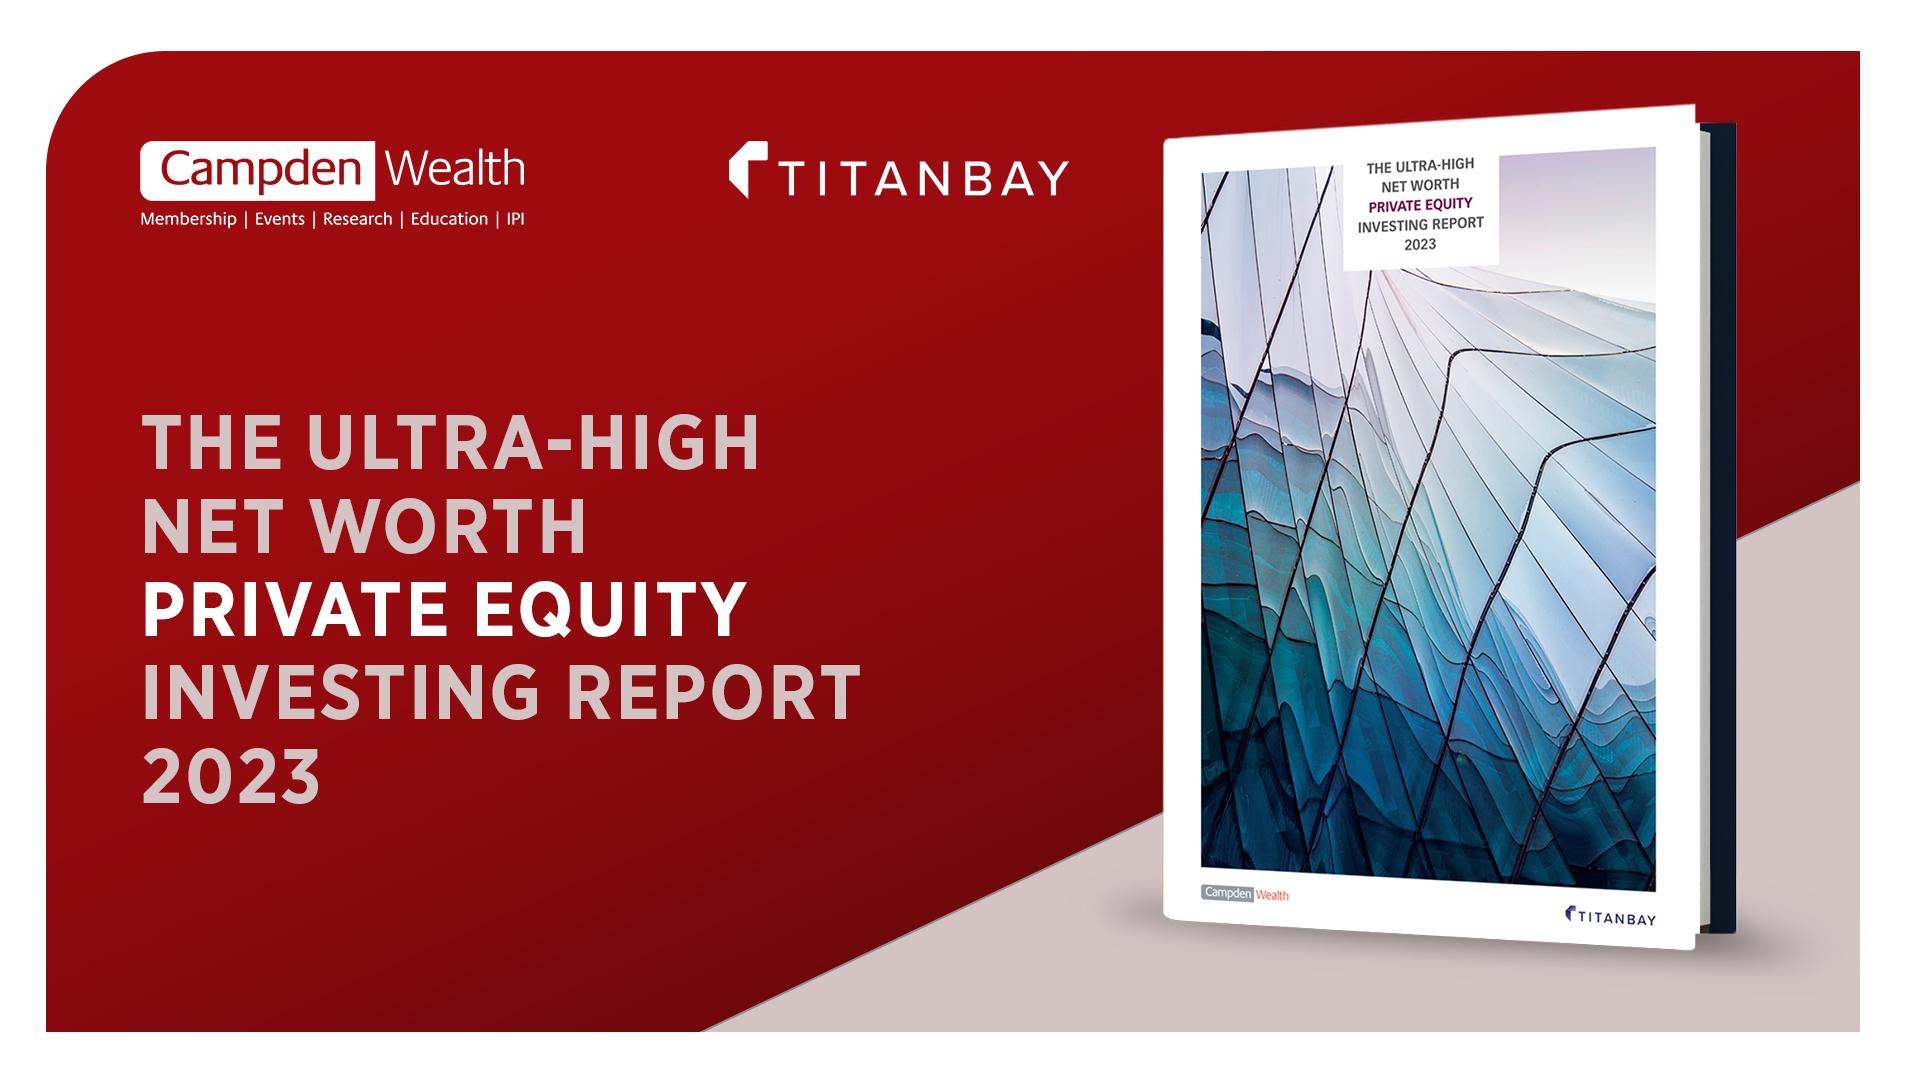 The Ultra- High Net Worth Private Equity Investing Report 2023